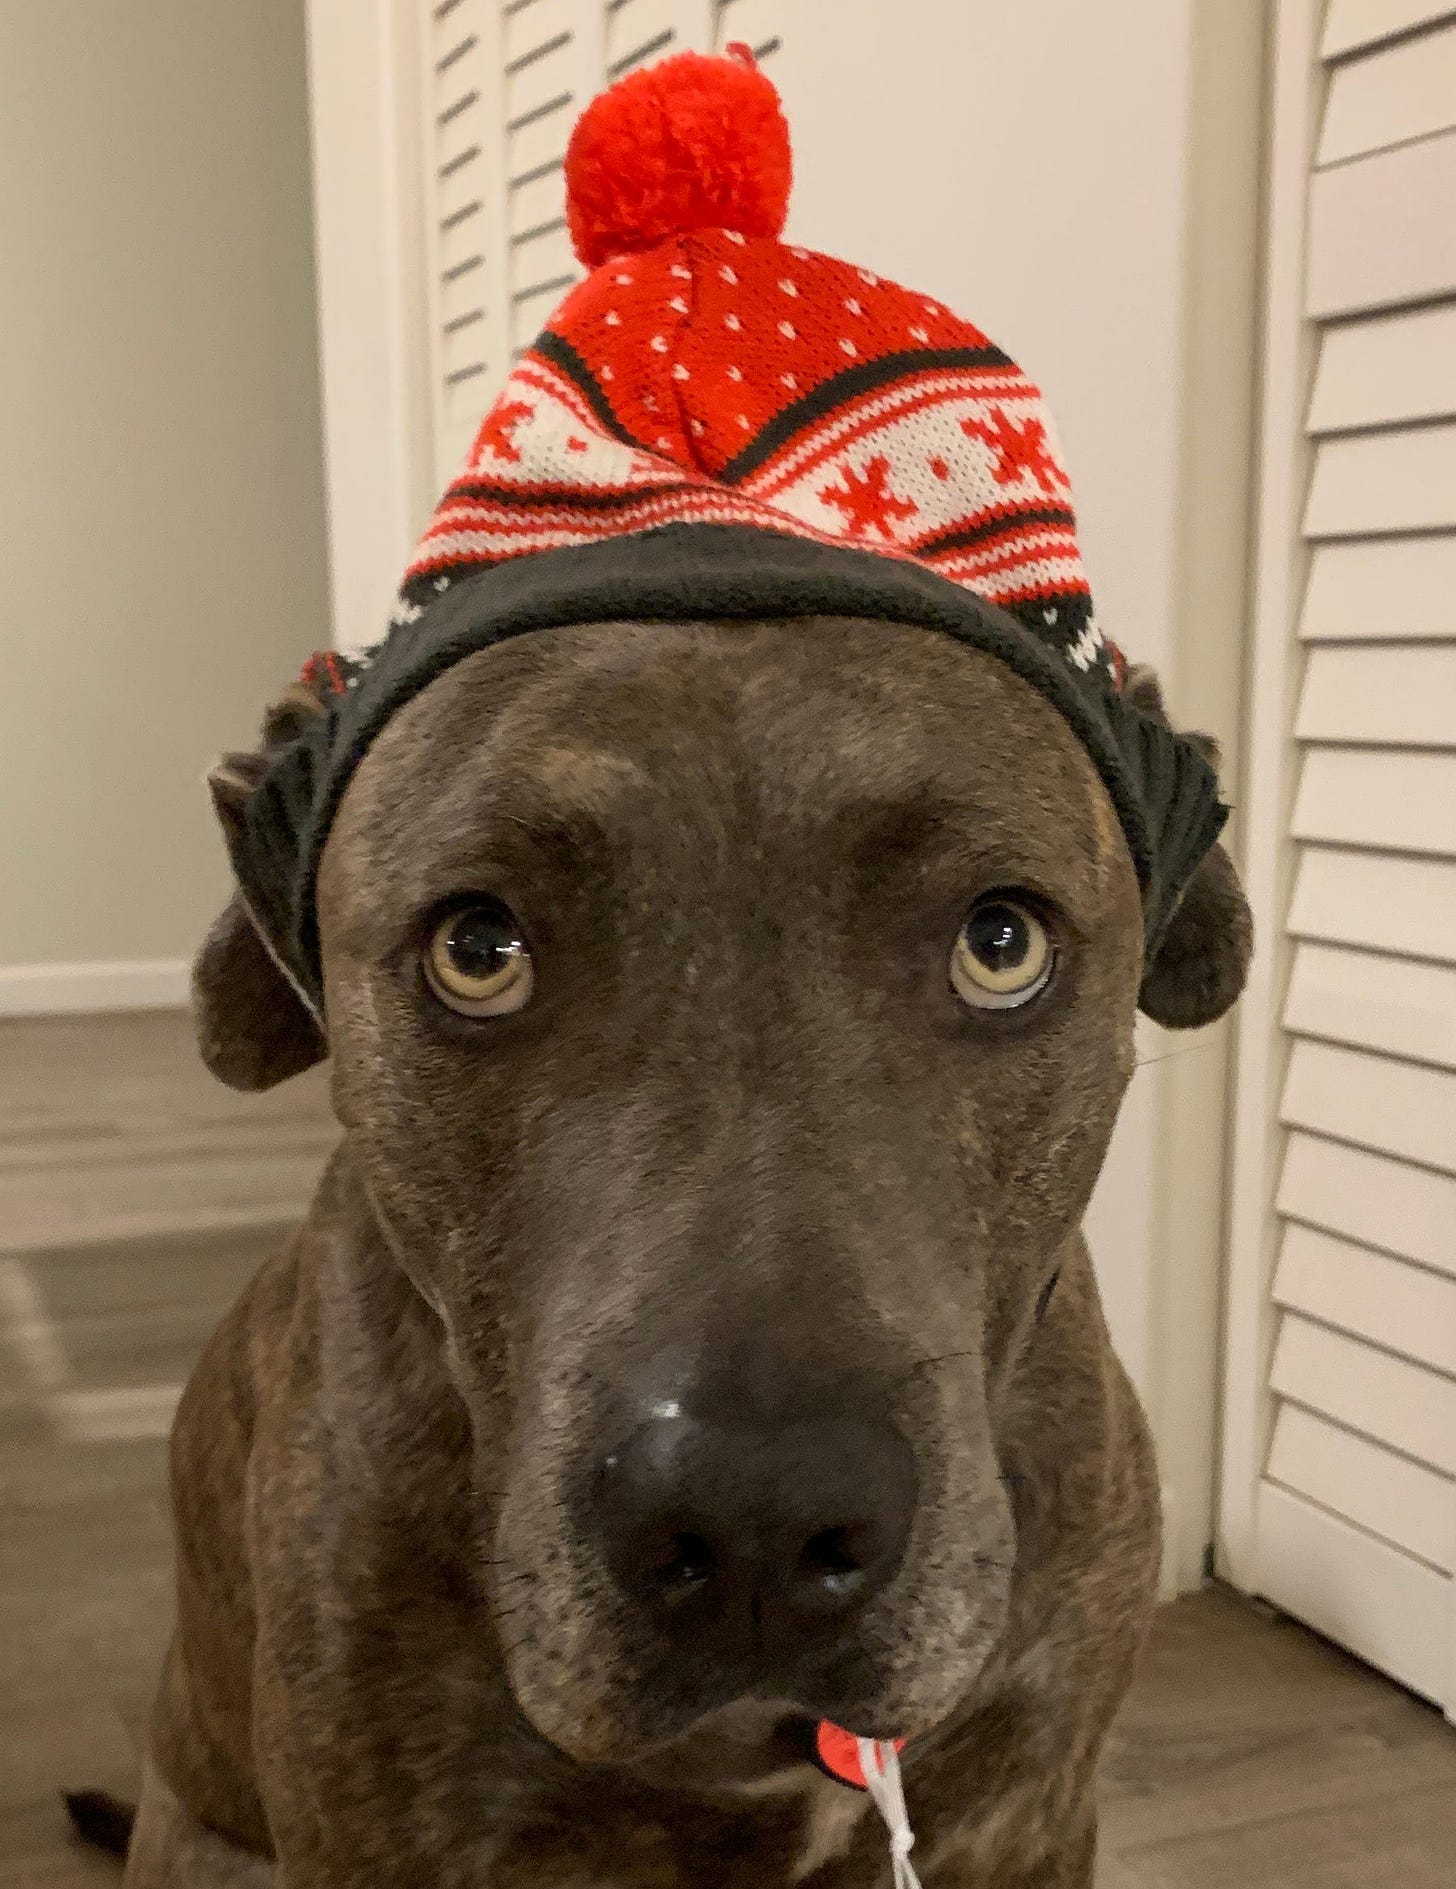 Big puppy wearing a red winter hat staring at the camera.